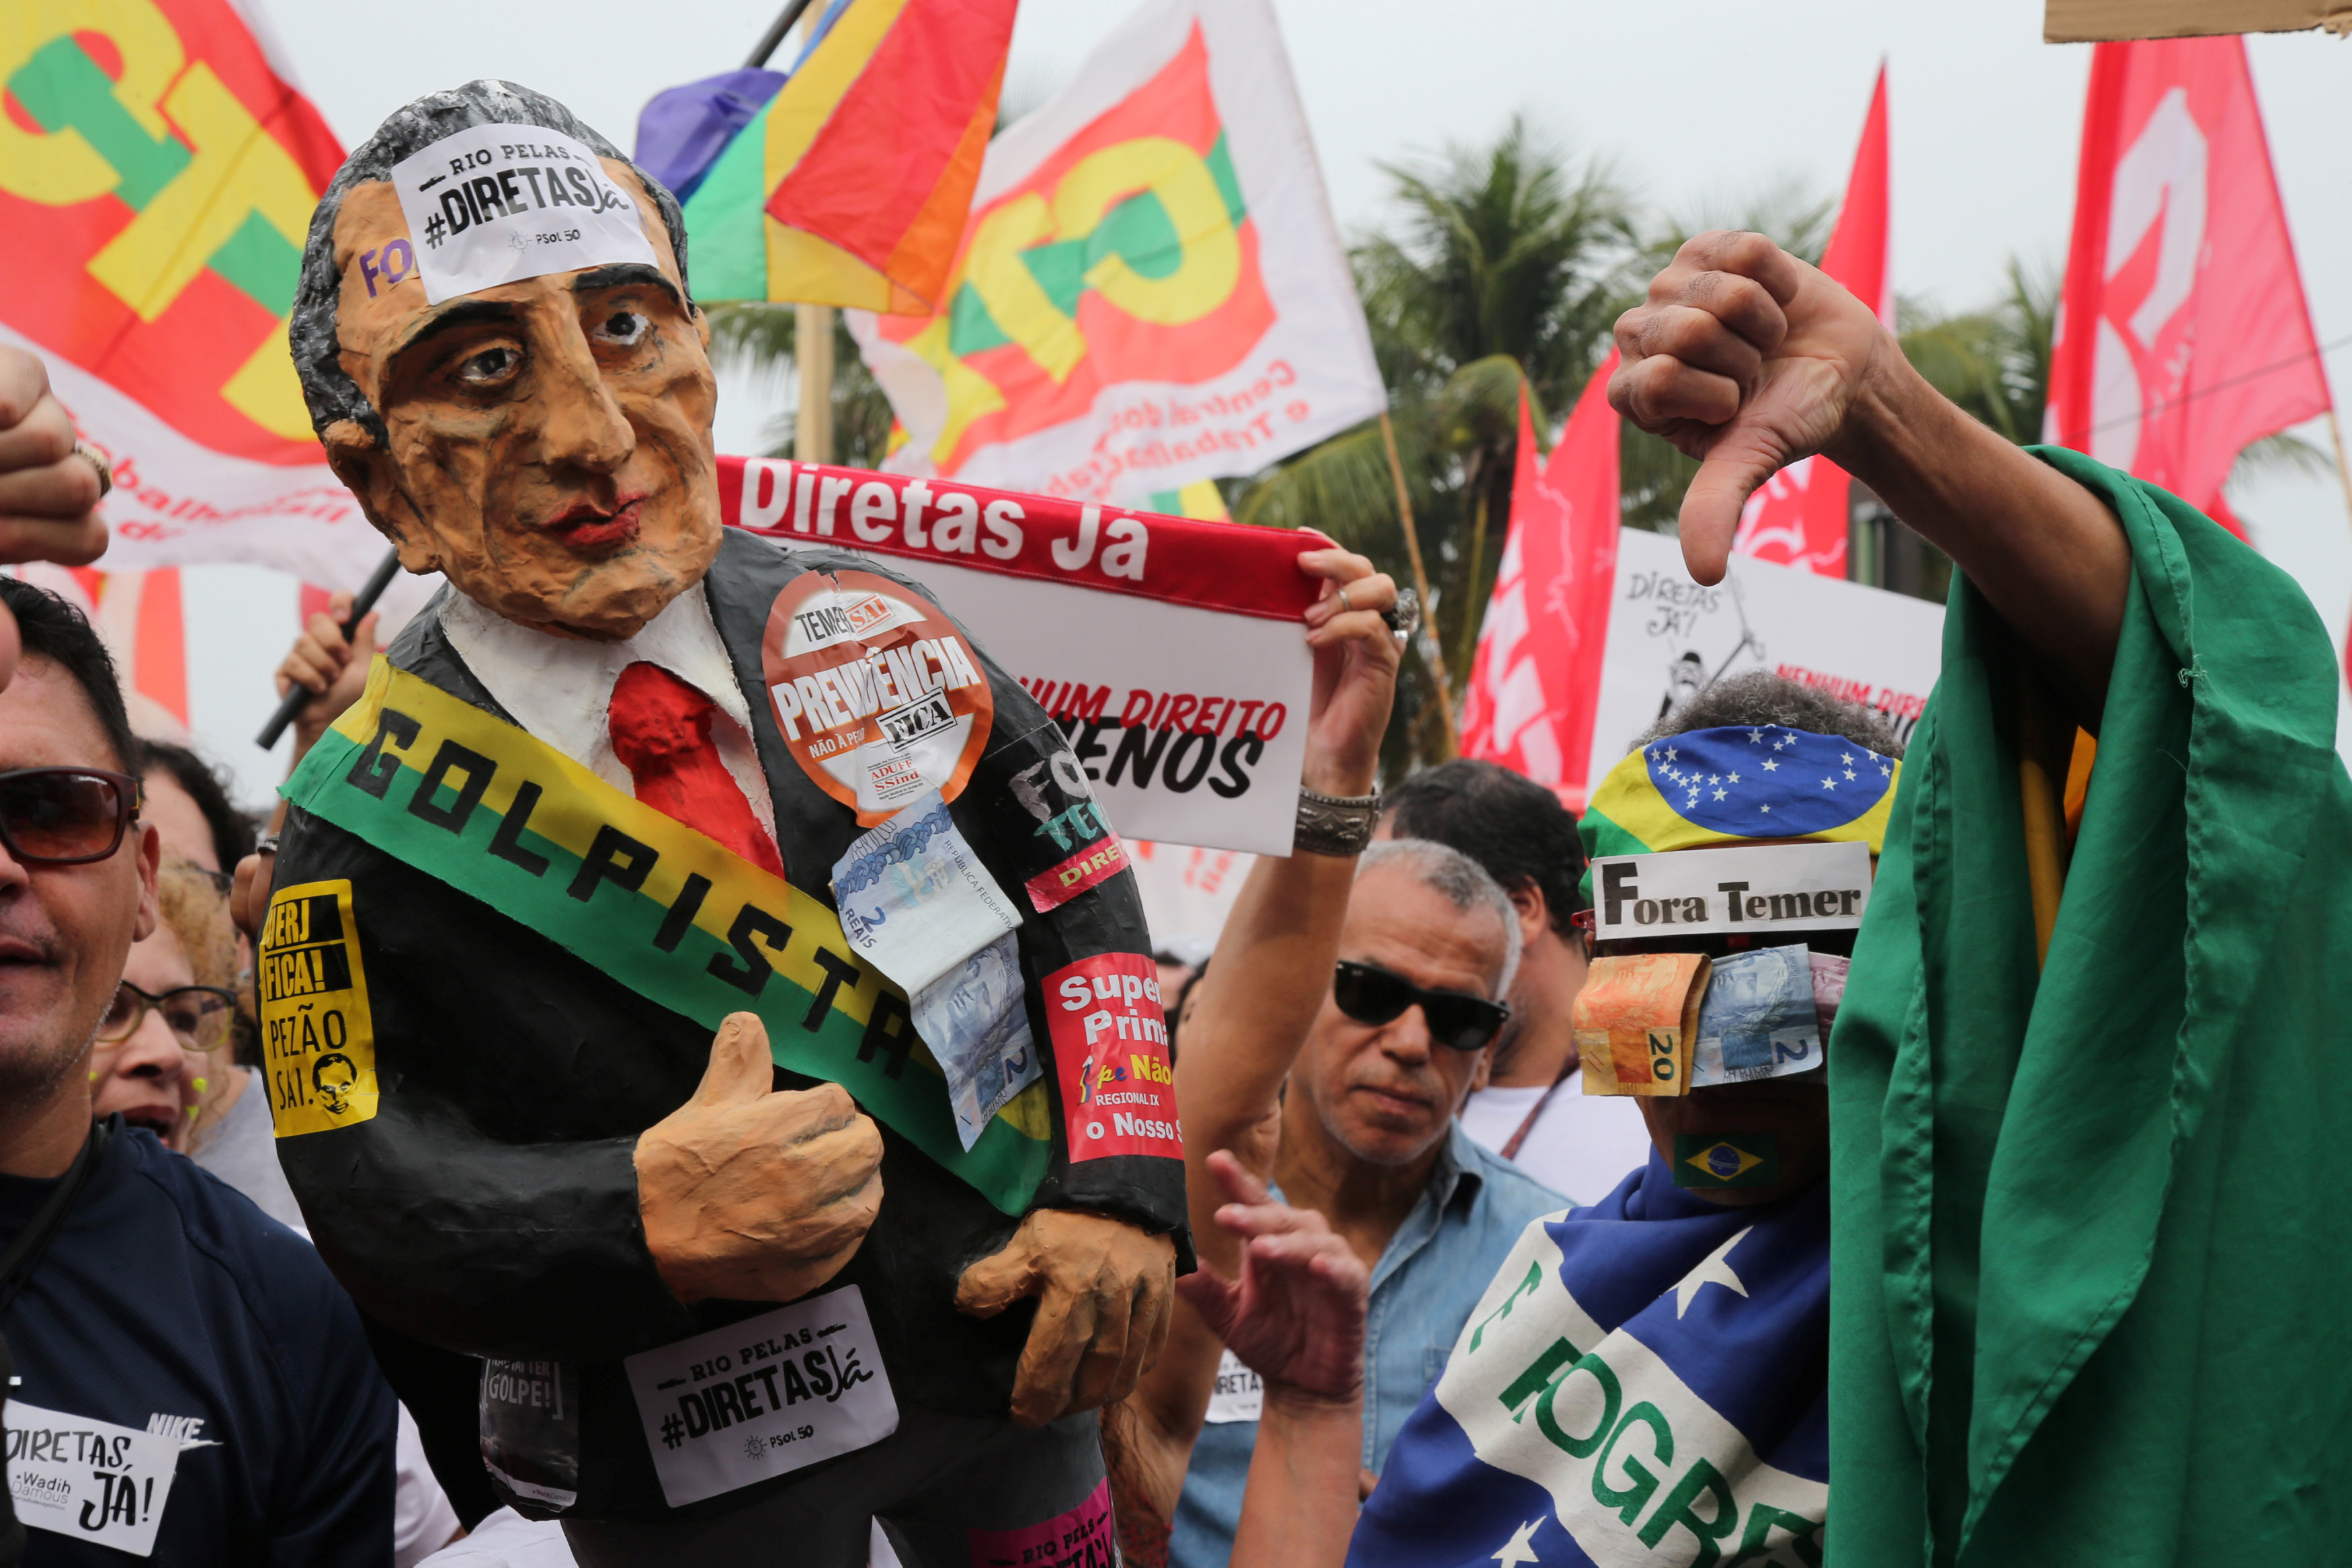 Popular protests against corruption have intensified in recent weeks in Brazil.